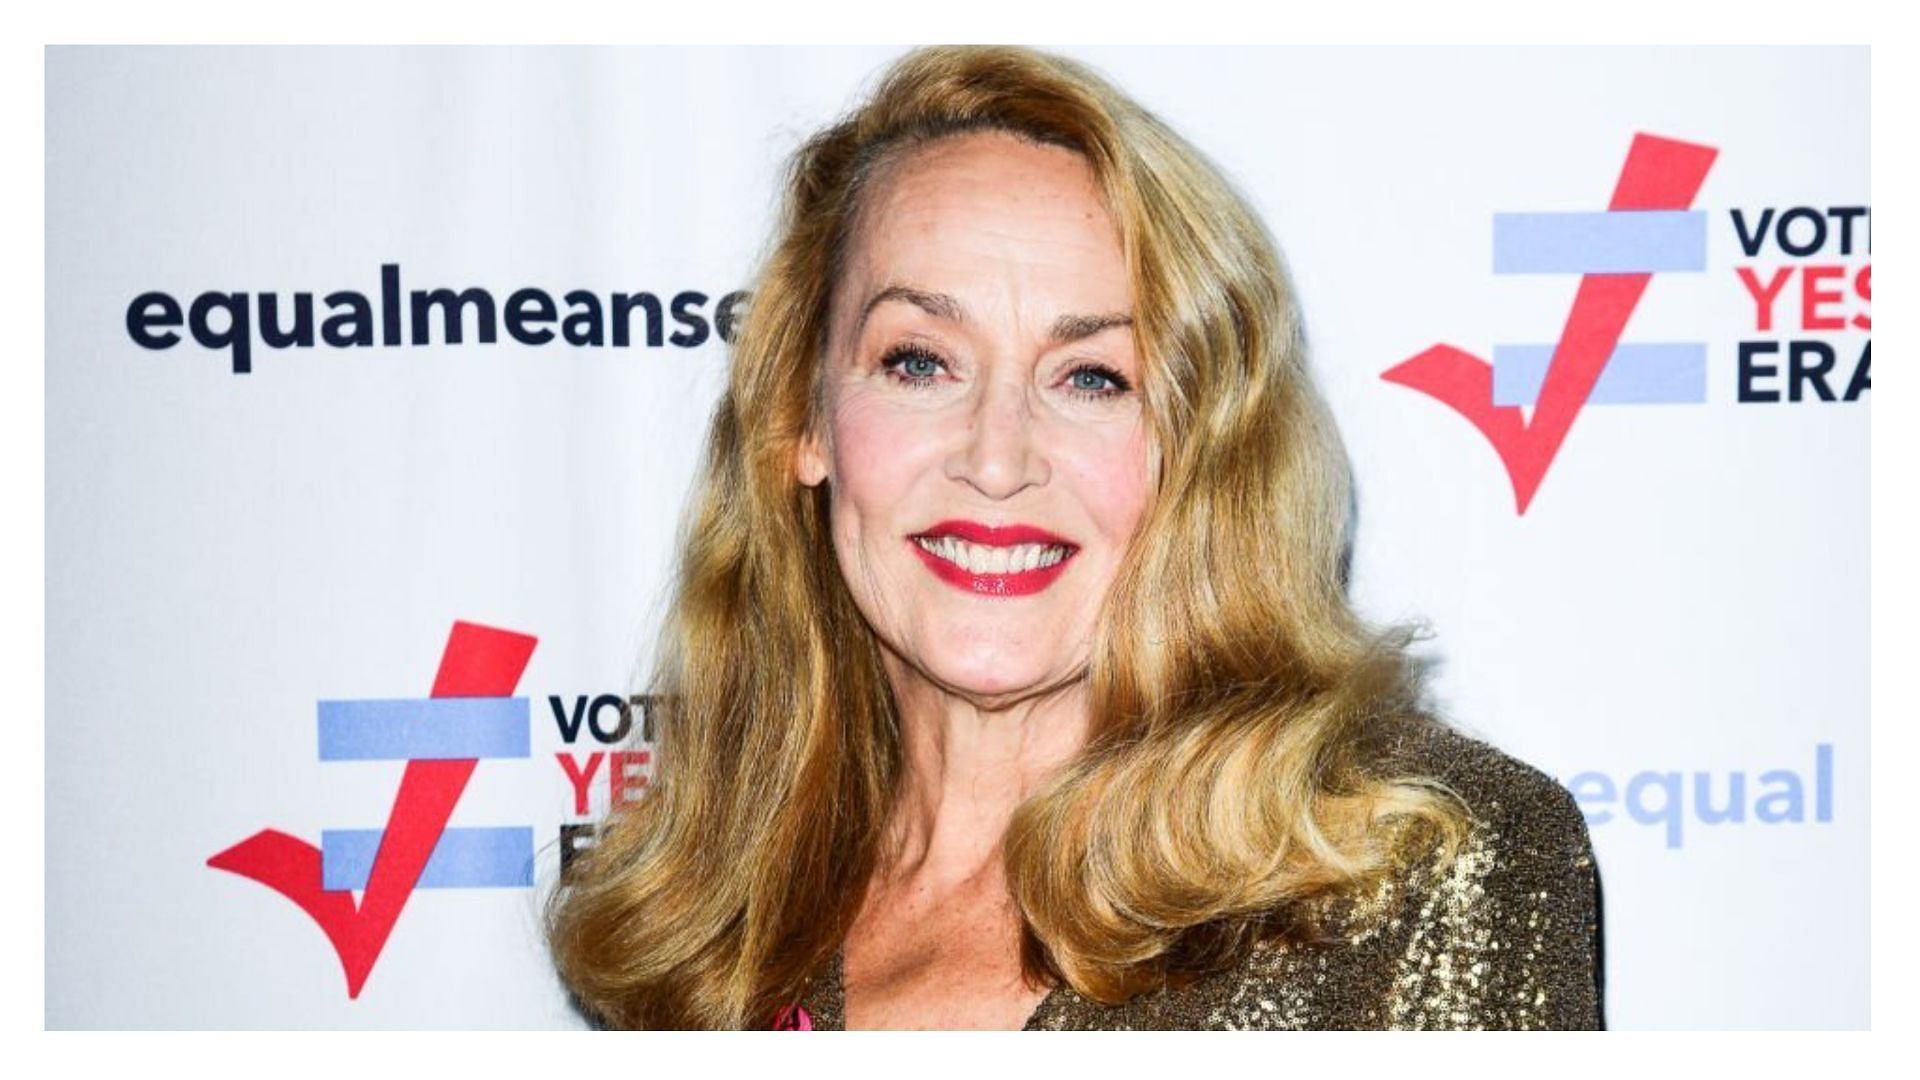 Jerry Hall is popular as a model and actress (Image via Aurora Rose/Getty Images)